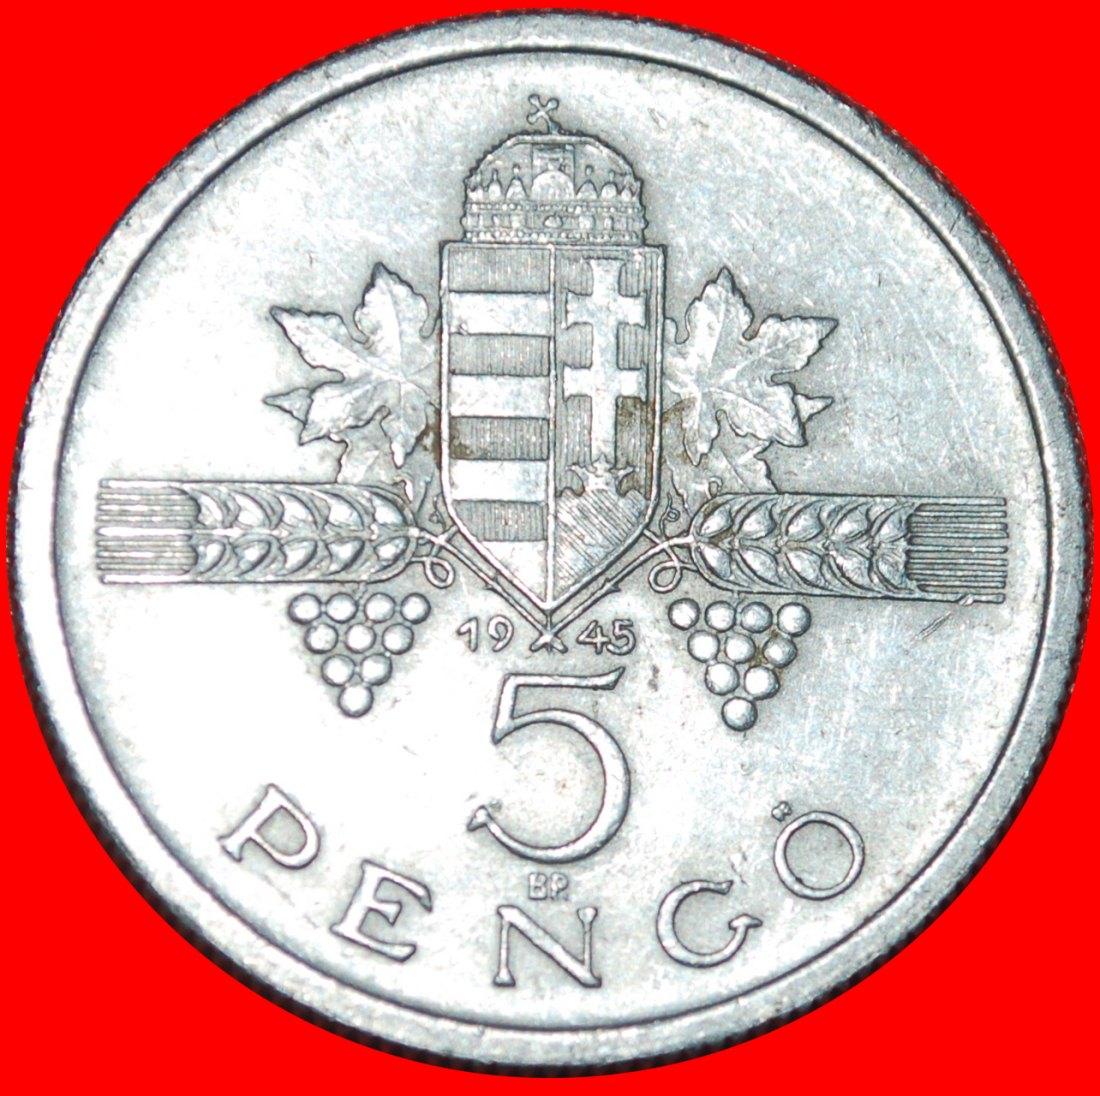  * CROWN: HUNGARY ★ 5 PENGO 1945 PARLIAMENT! LOW START ★ NO RESERVE!   